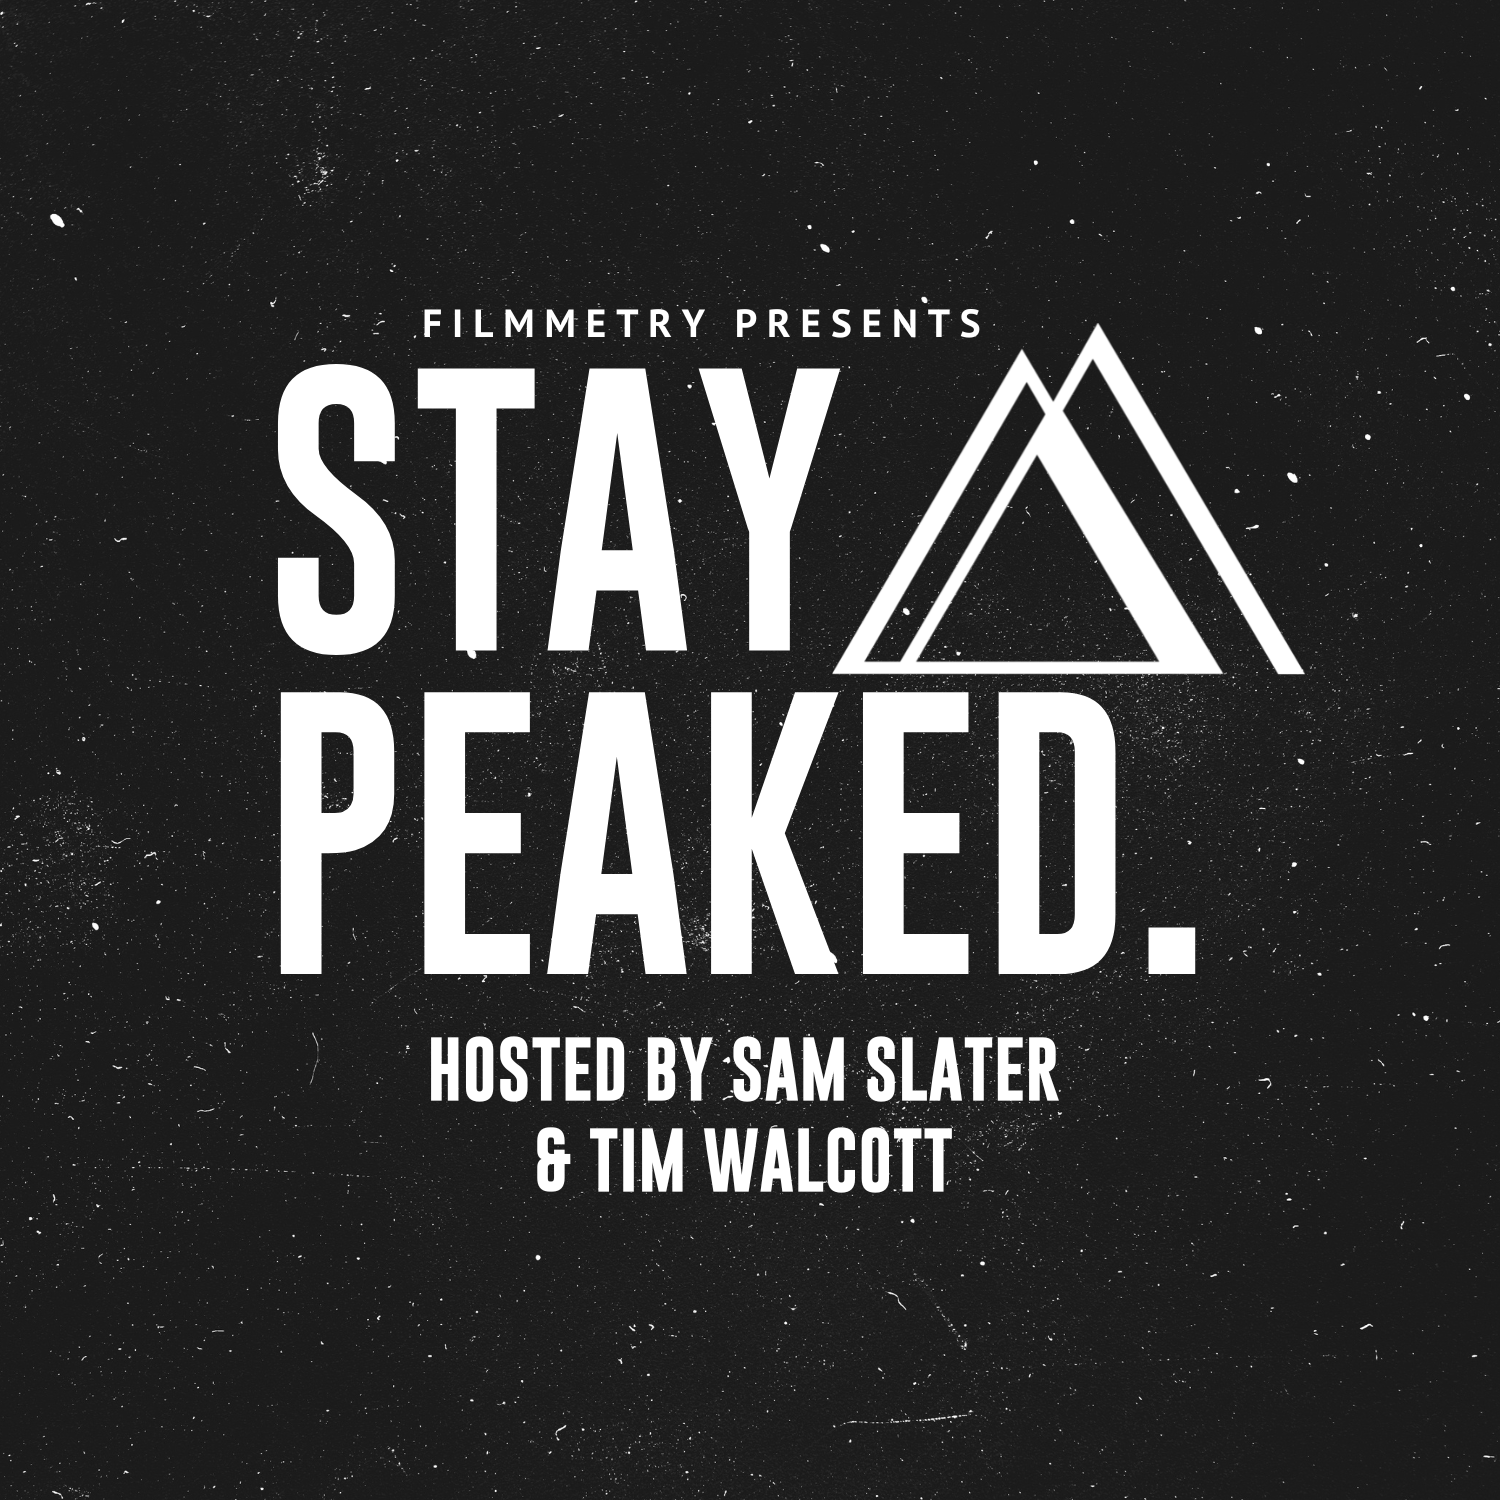 Artwork for Stay Peaked.